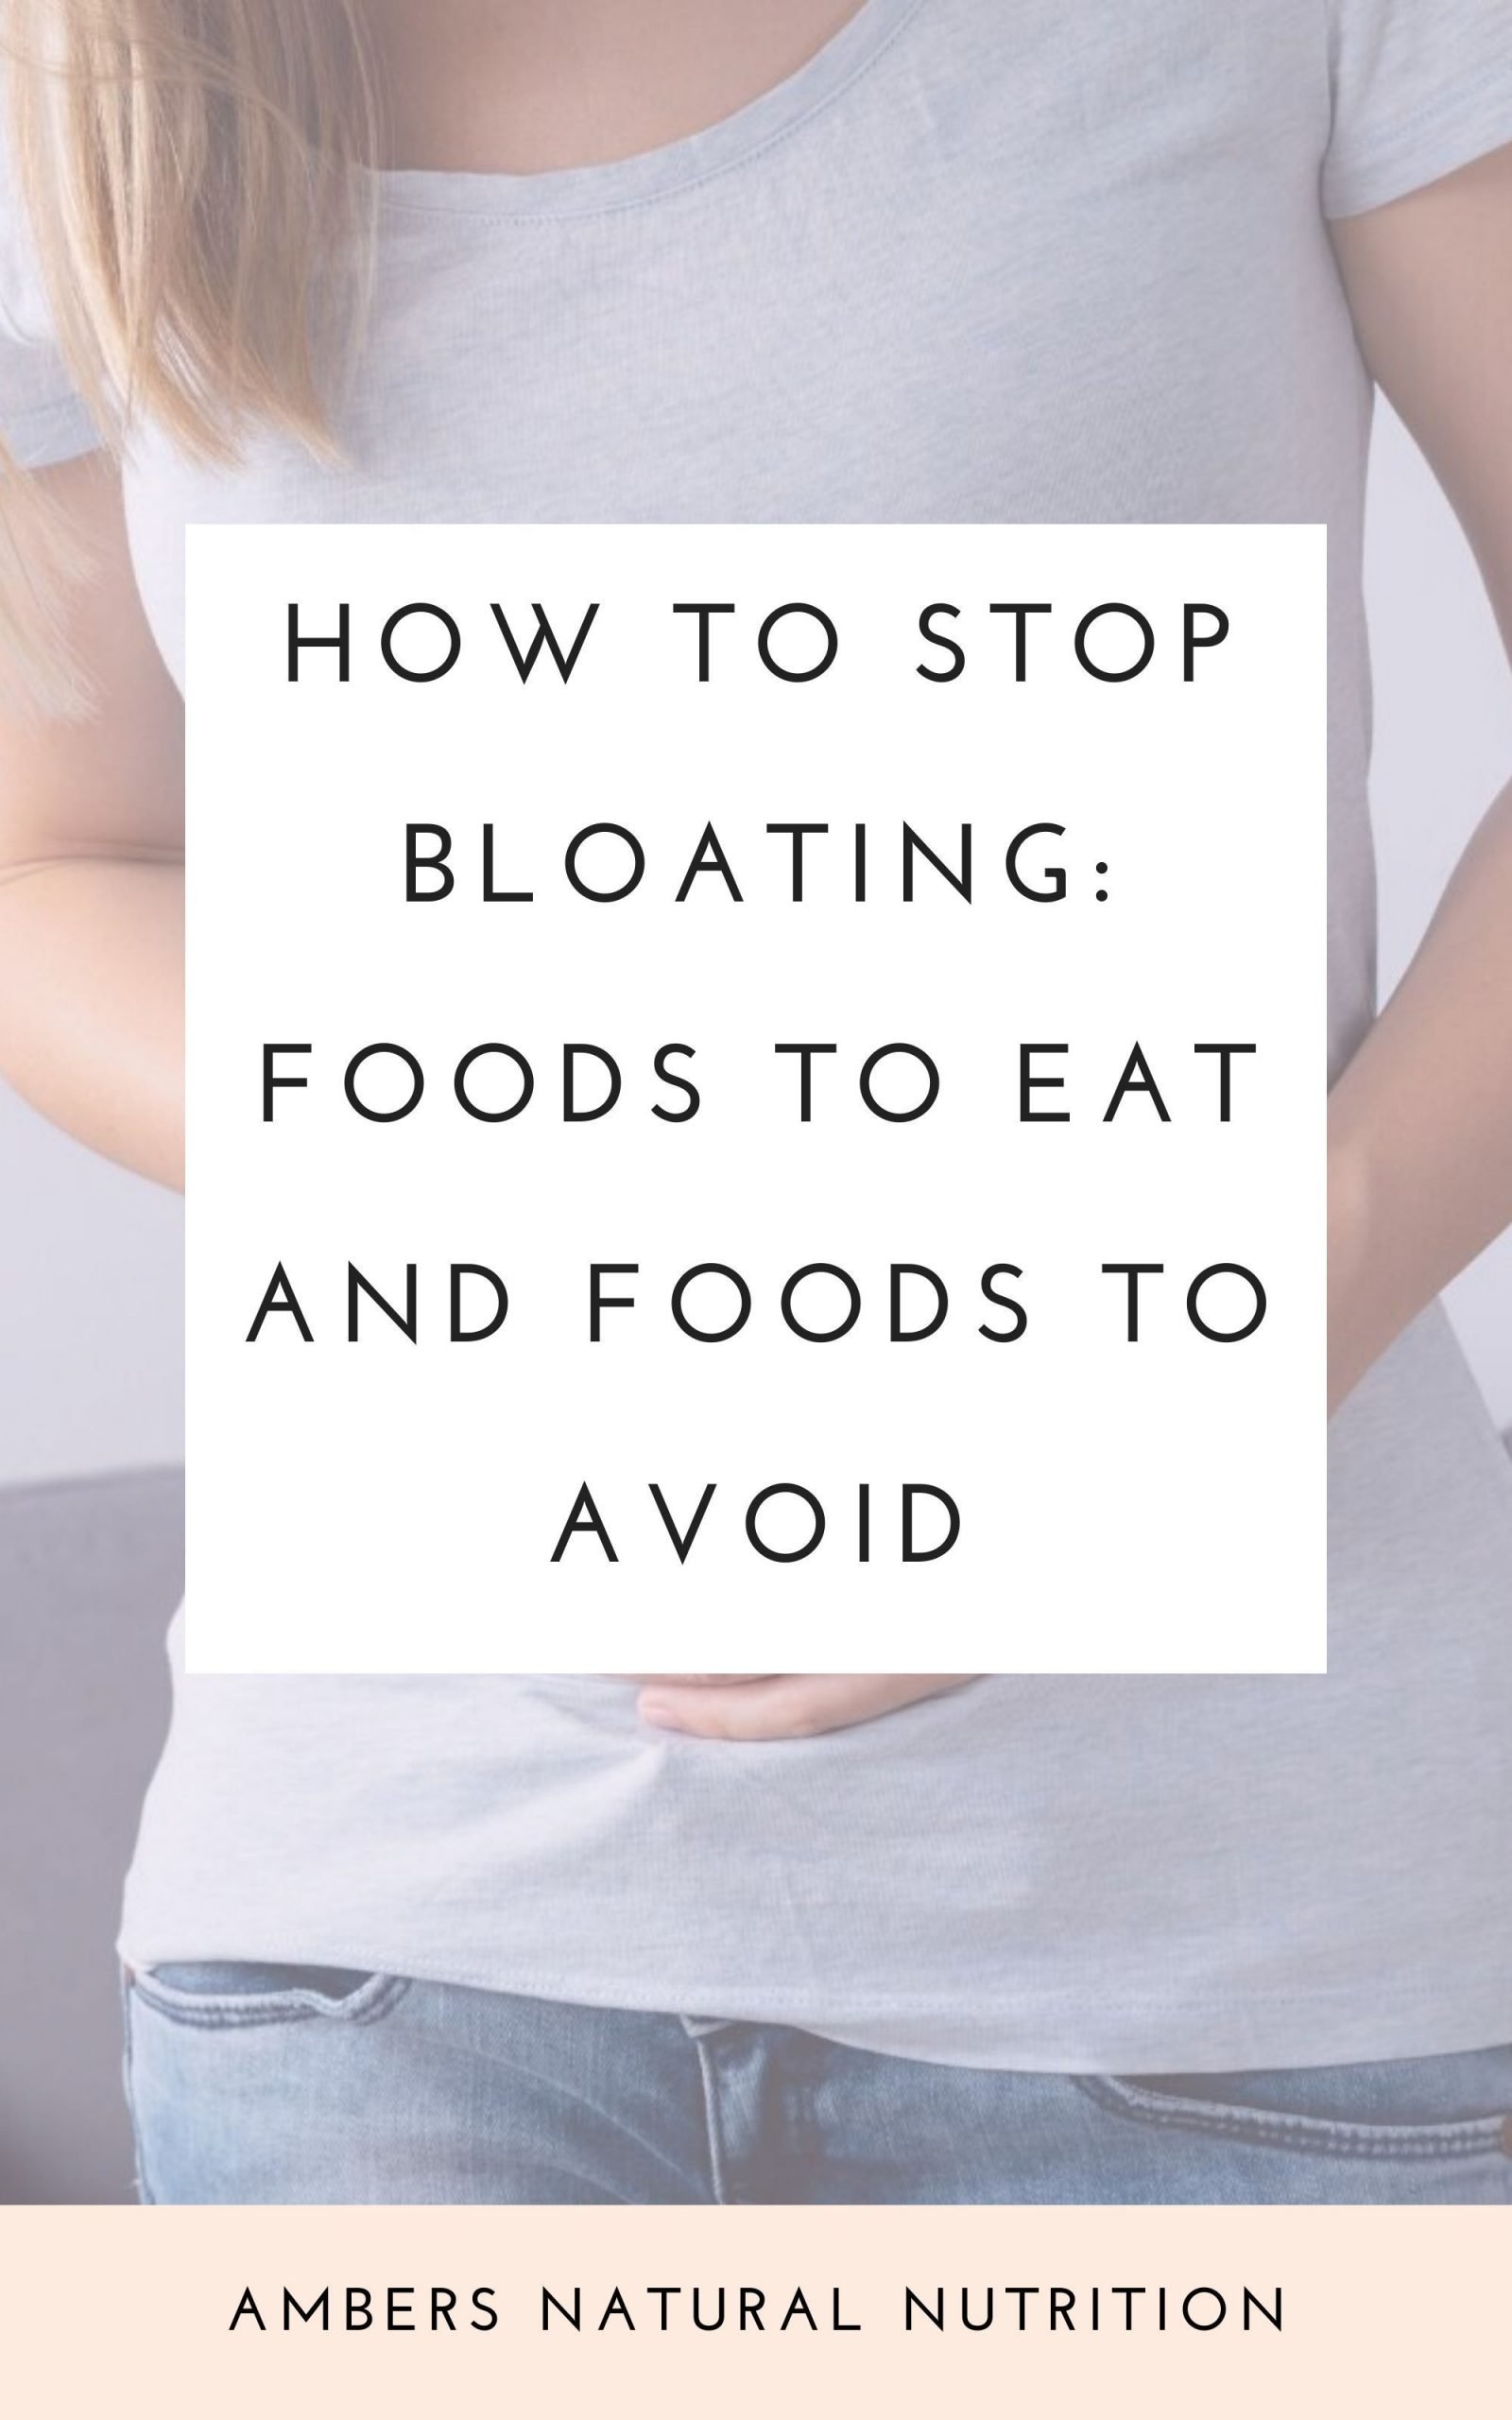 Foods that are likely to cause bloating are any ...